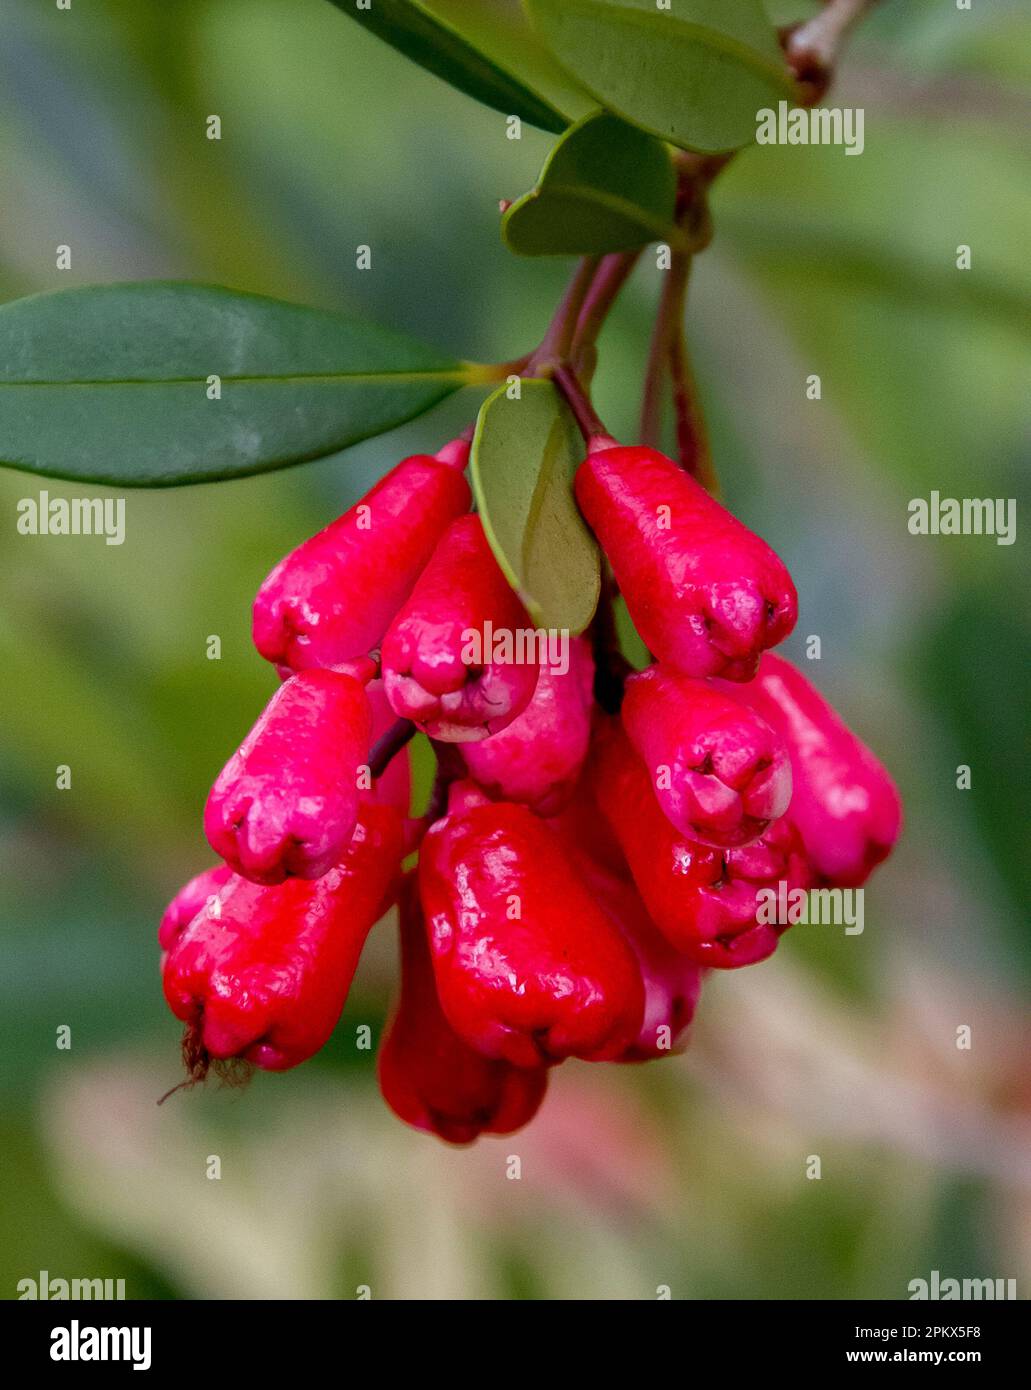 Bunch of bright red Riberries (syzygium luehmannii),on lilly pilly tree. Australian fruit, bush tucker, grown in Queensland, Australia. Stock Photo